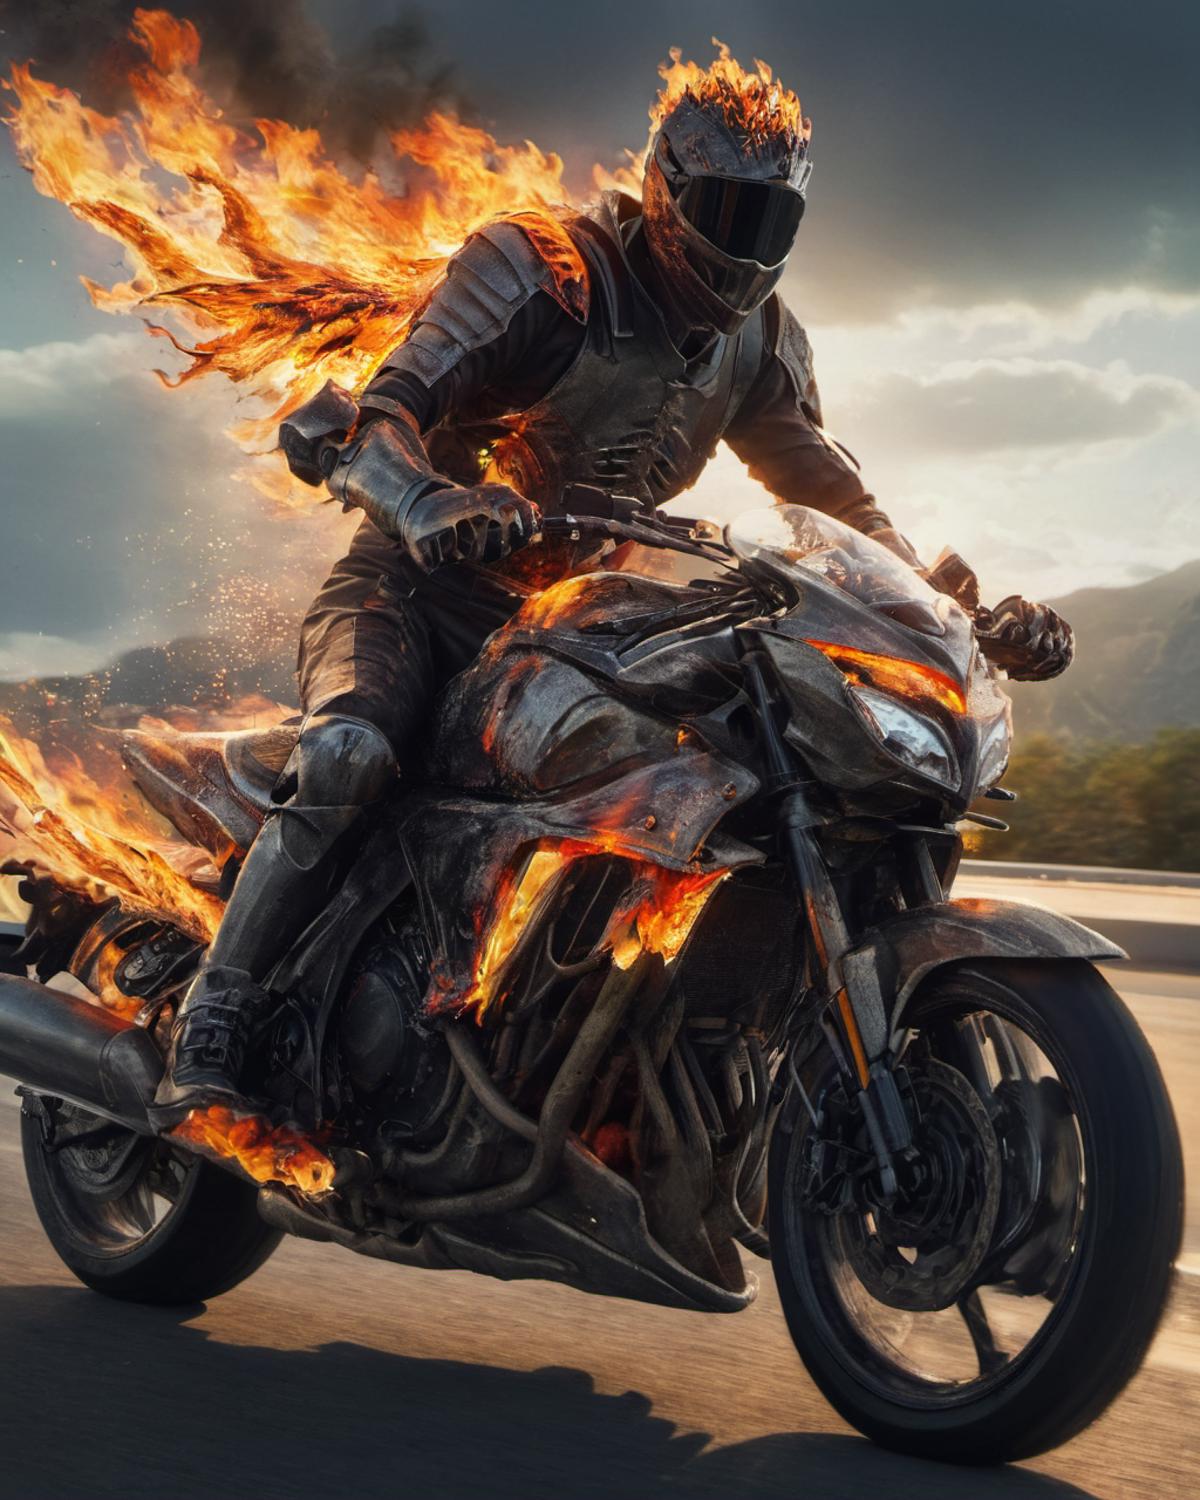 A man riding a motorcycle with fire in the background.